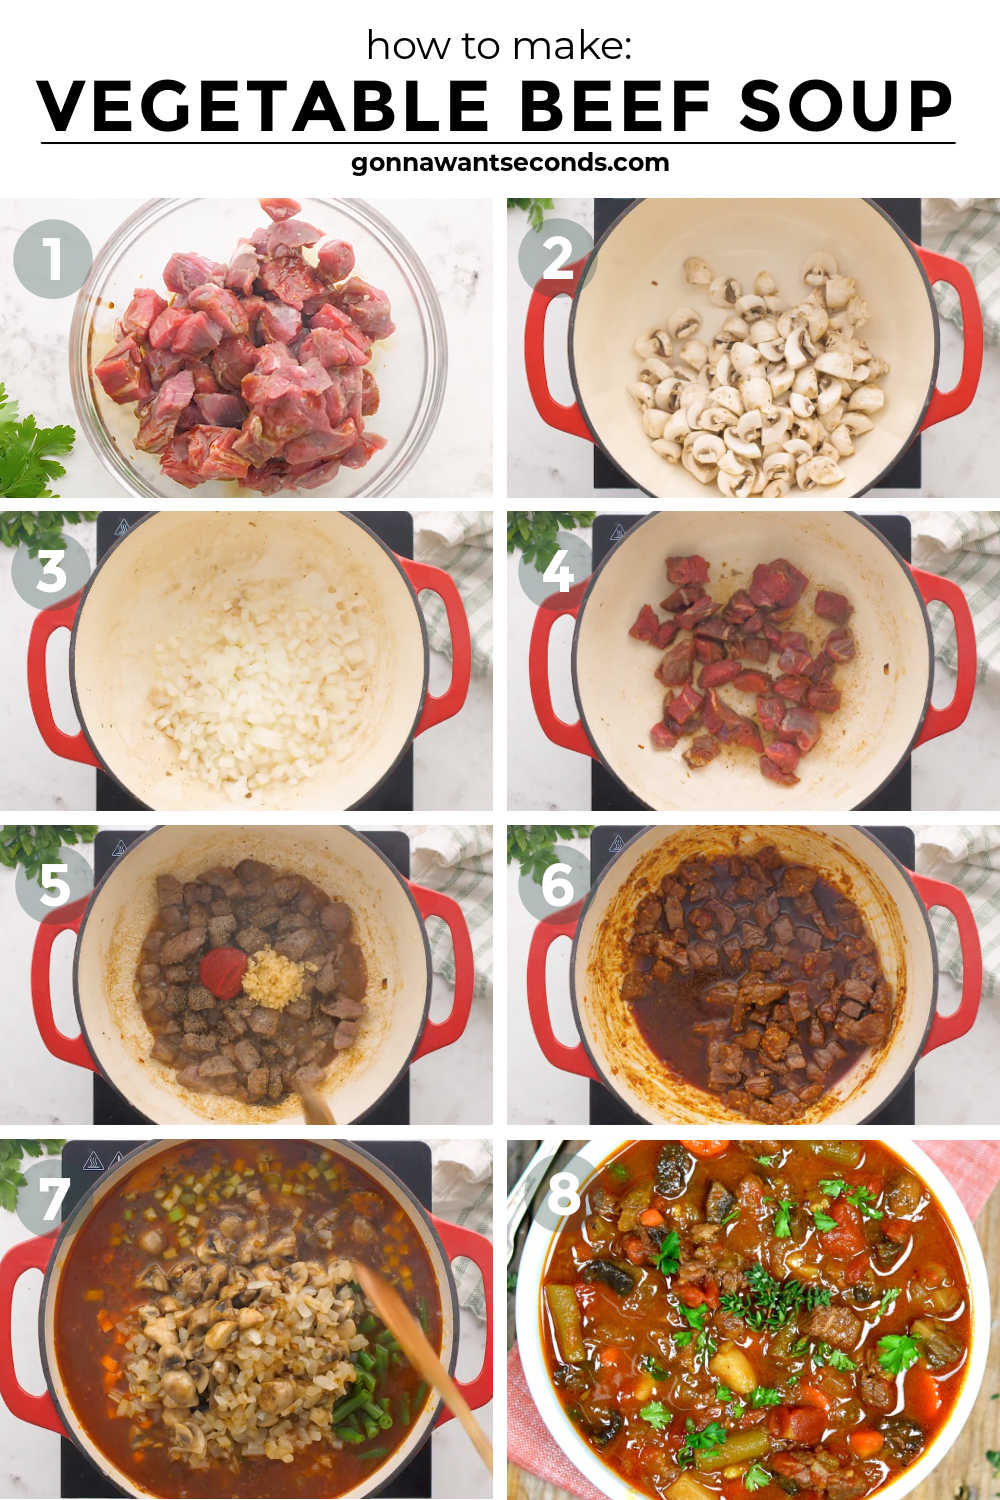 Step by step how to make vegetable beef soup